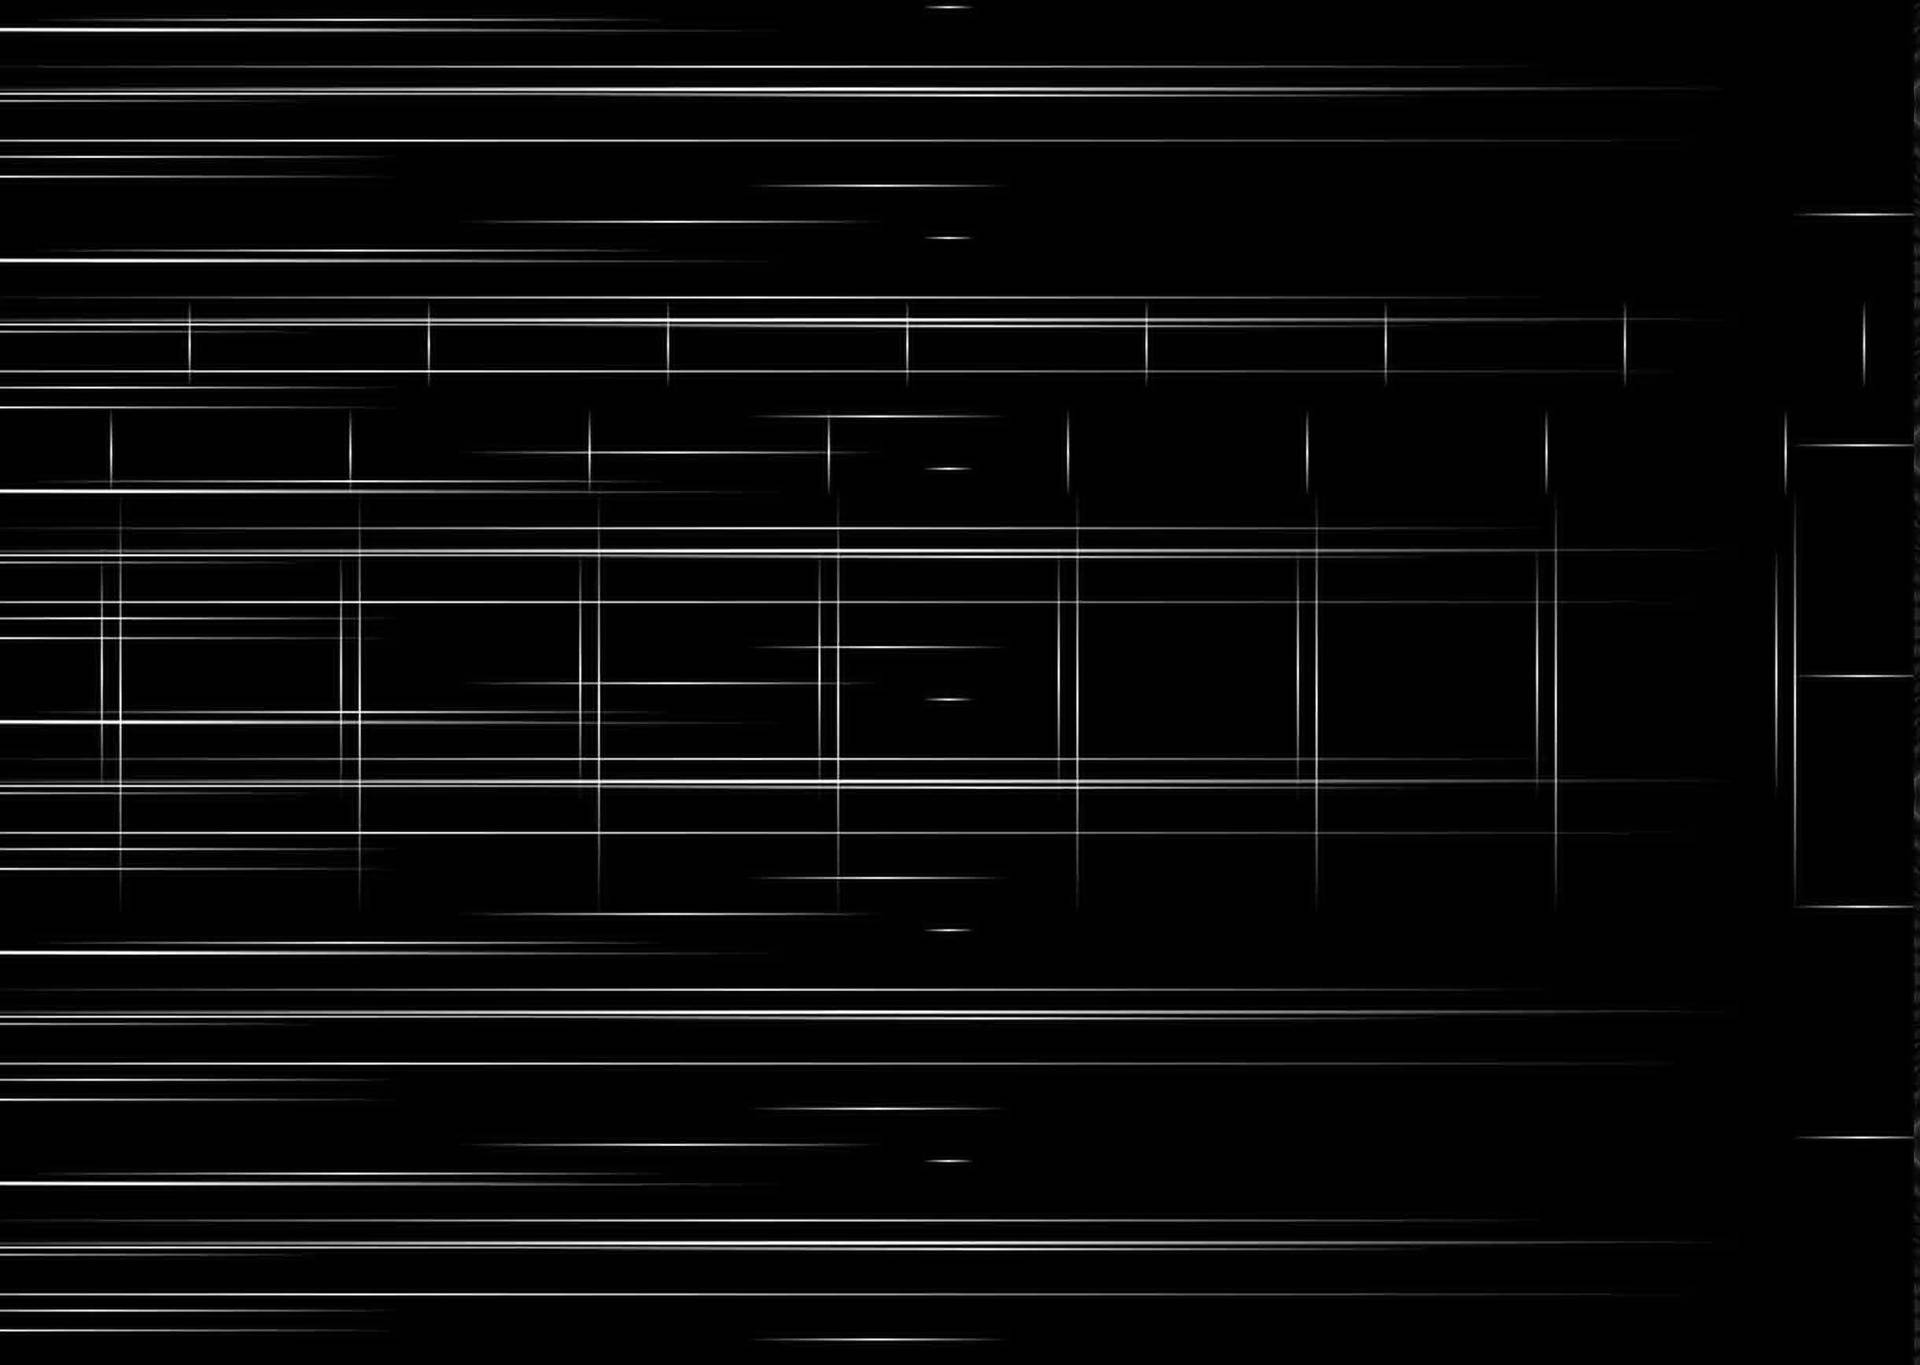 Enjoy the Simplicity of Lines in This Minimalistic Black & White Design Wallpaper